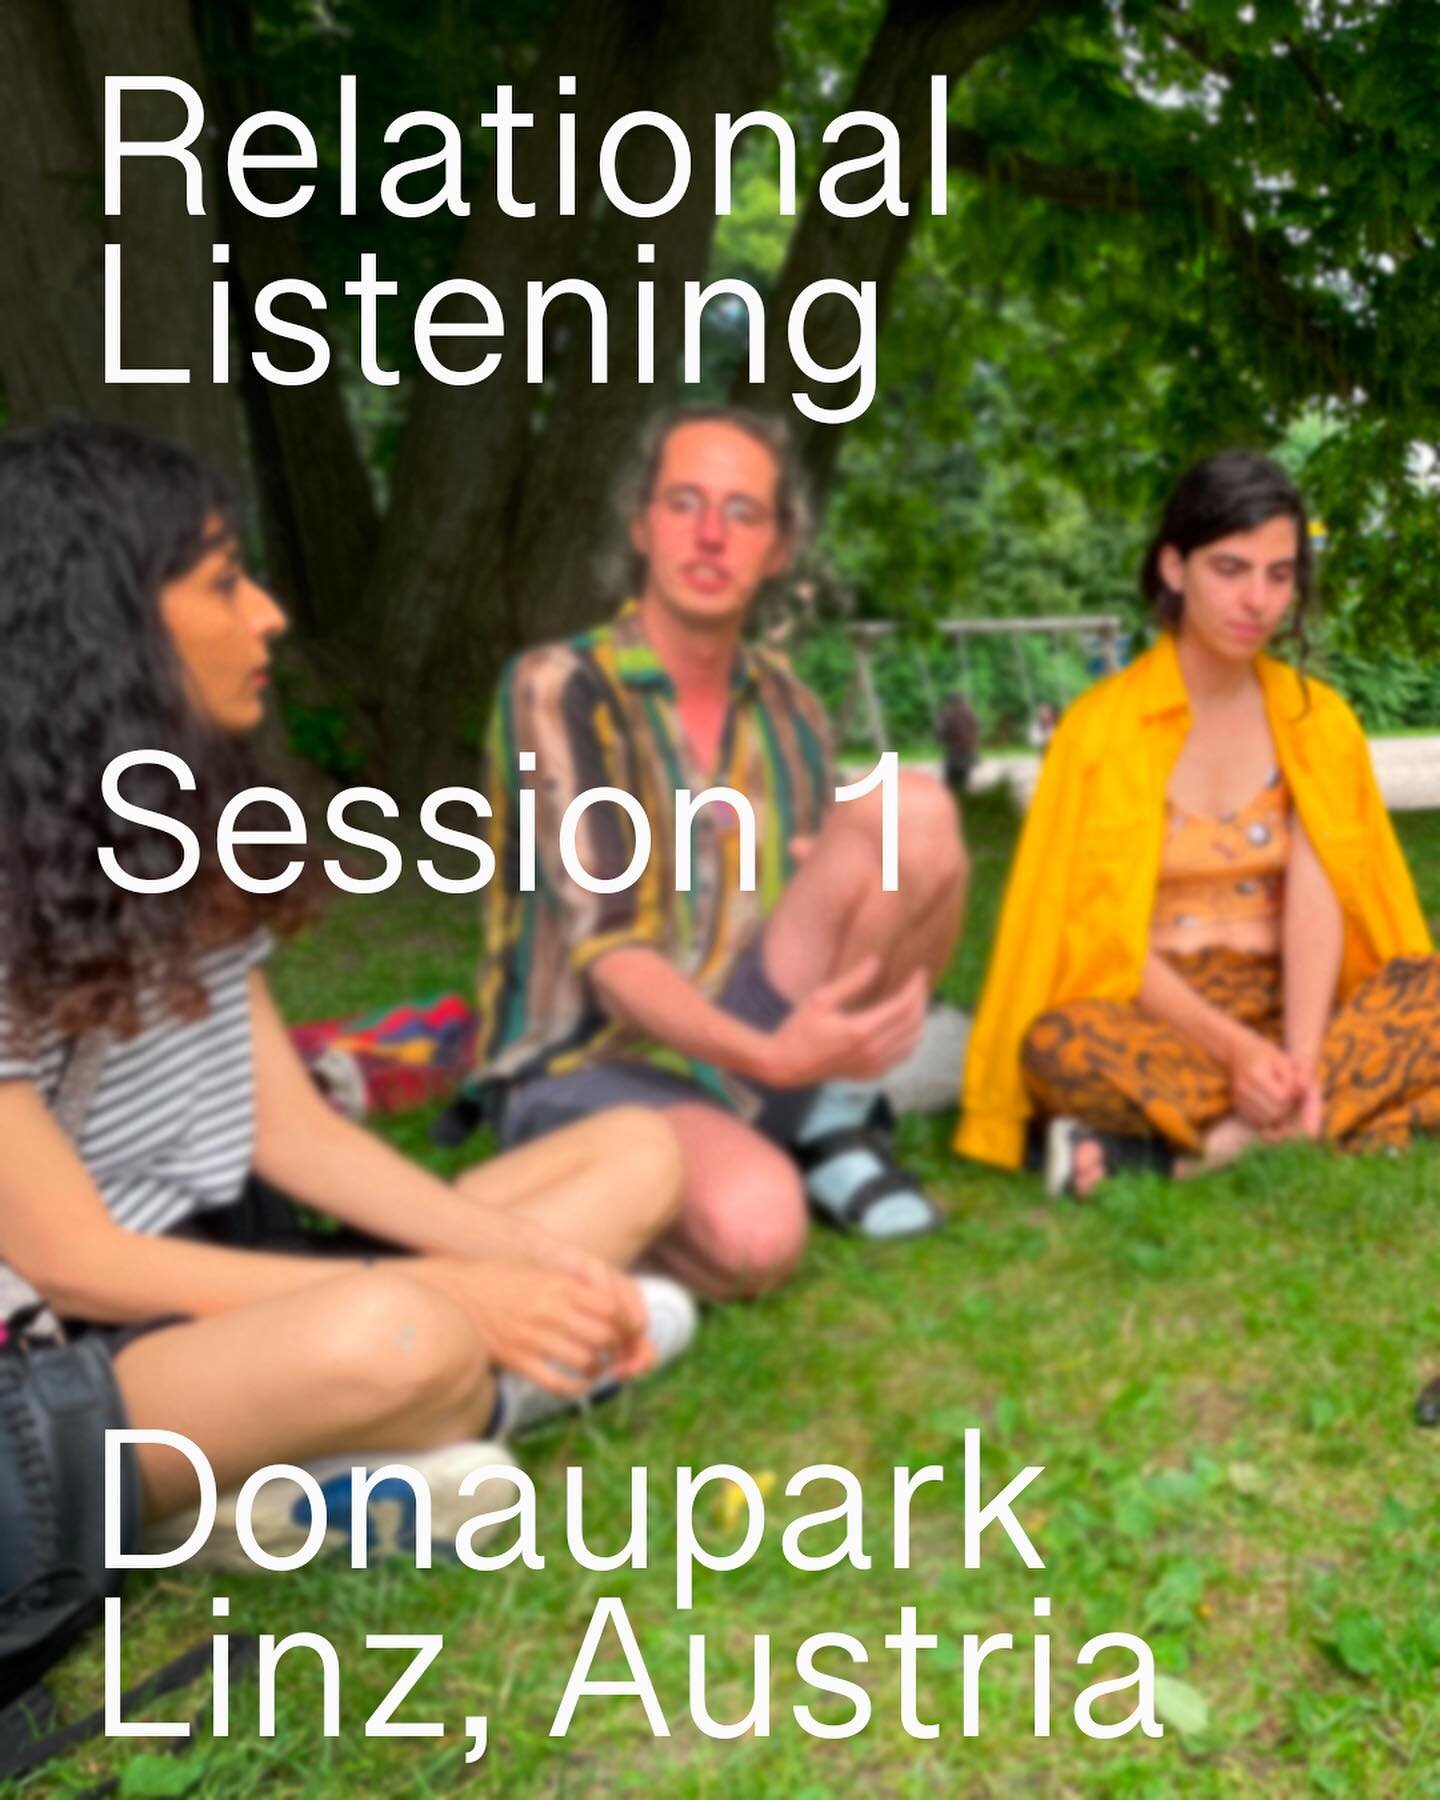 Really happy and inspired by the first session of &quot;Relational Listening&quot;, which is a open heart gathering to talk and listen, without  judgment, without right or wrong, to share ideas, feelings, fears, thoughts and understand other points o